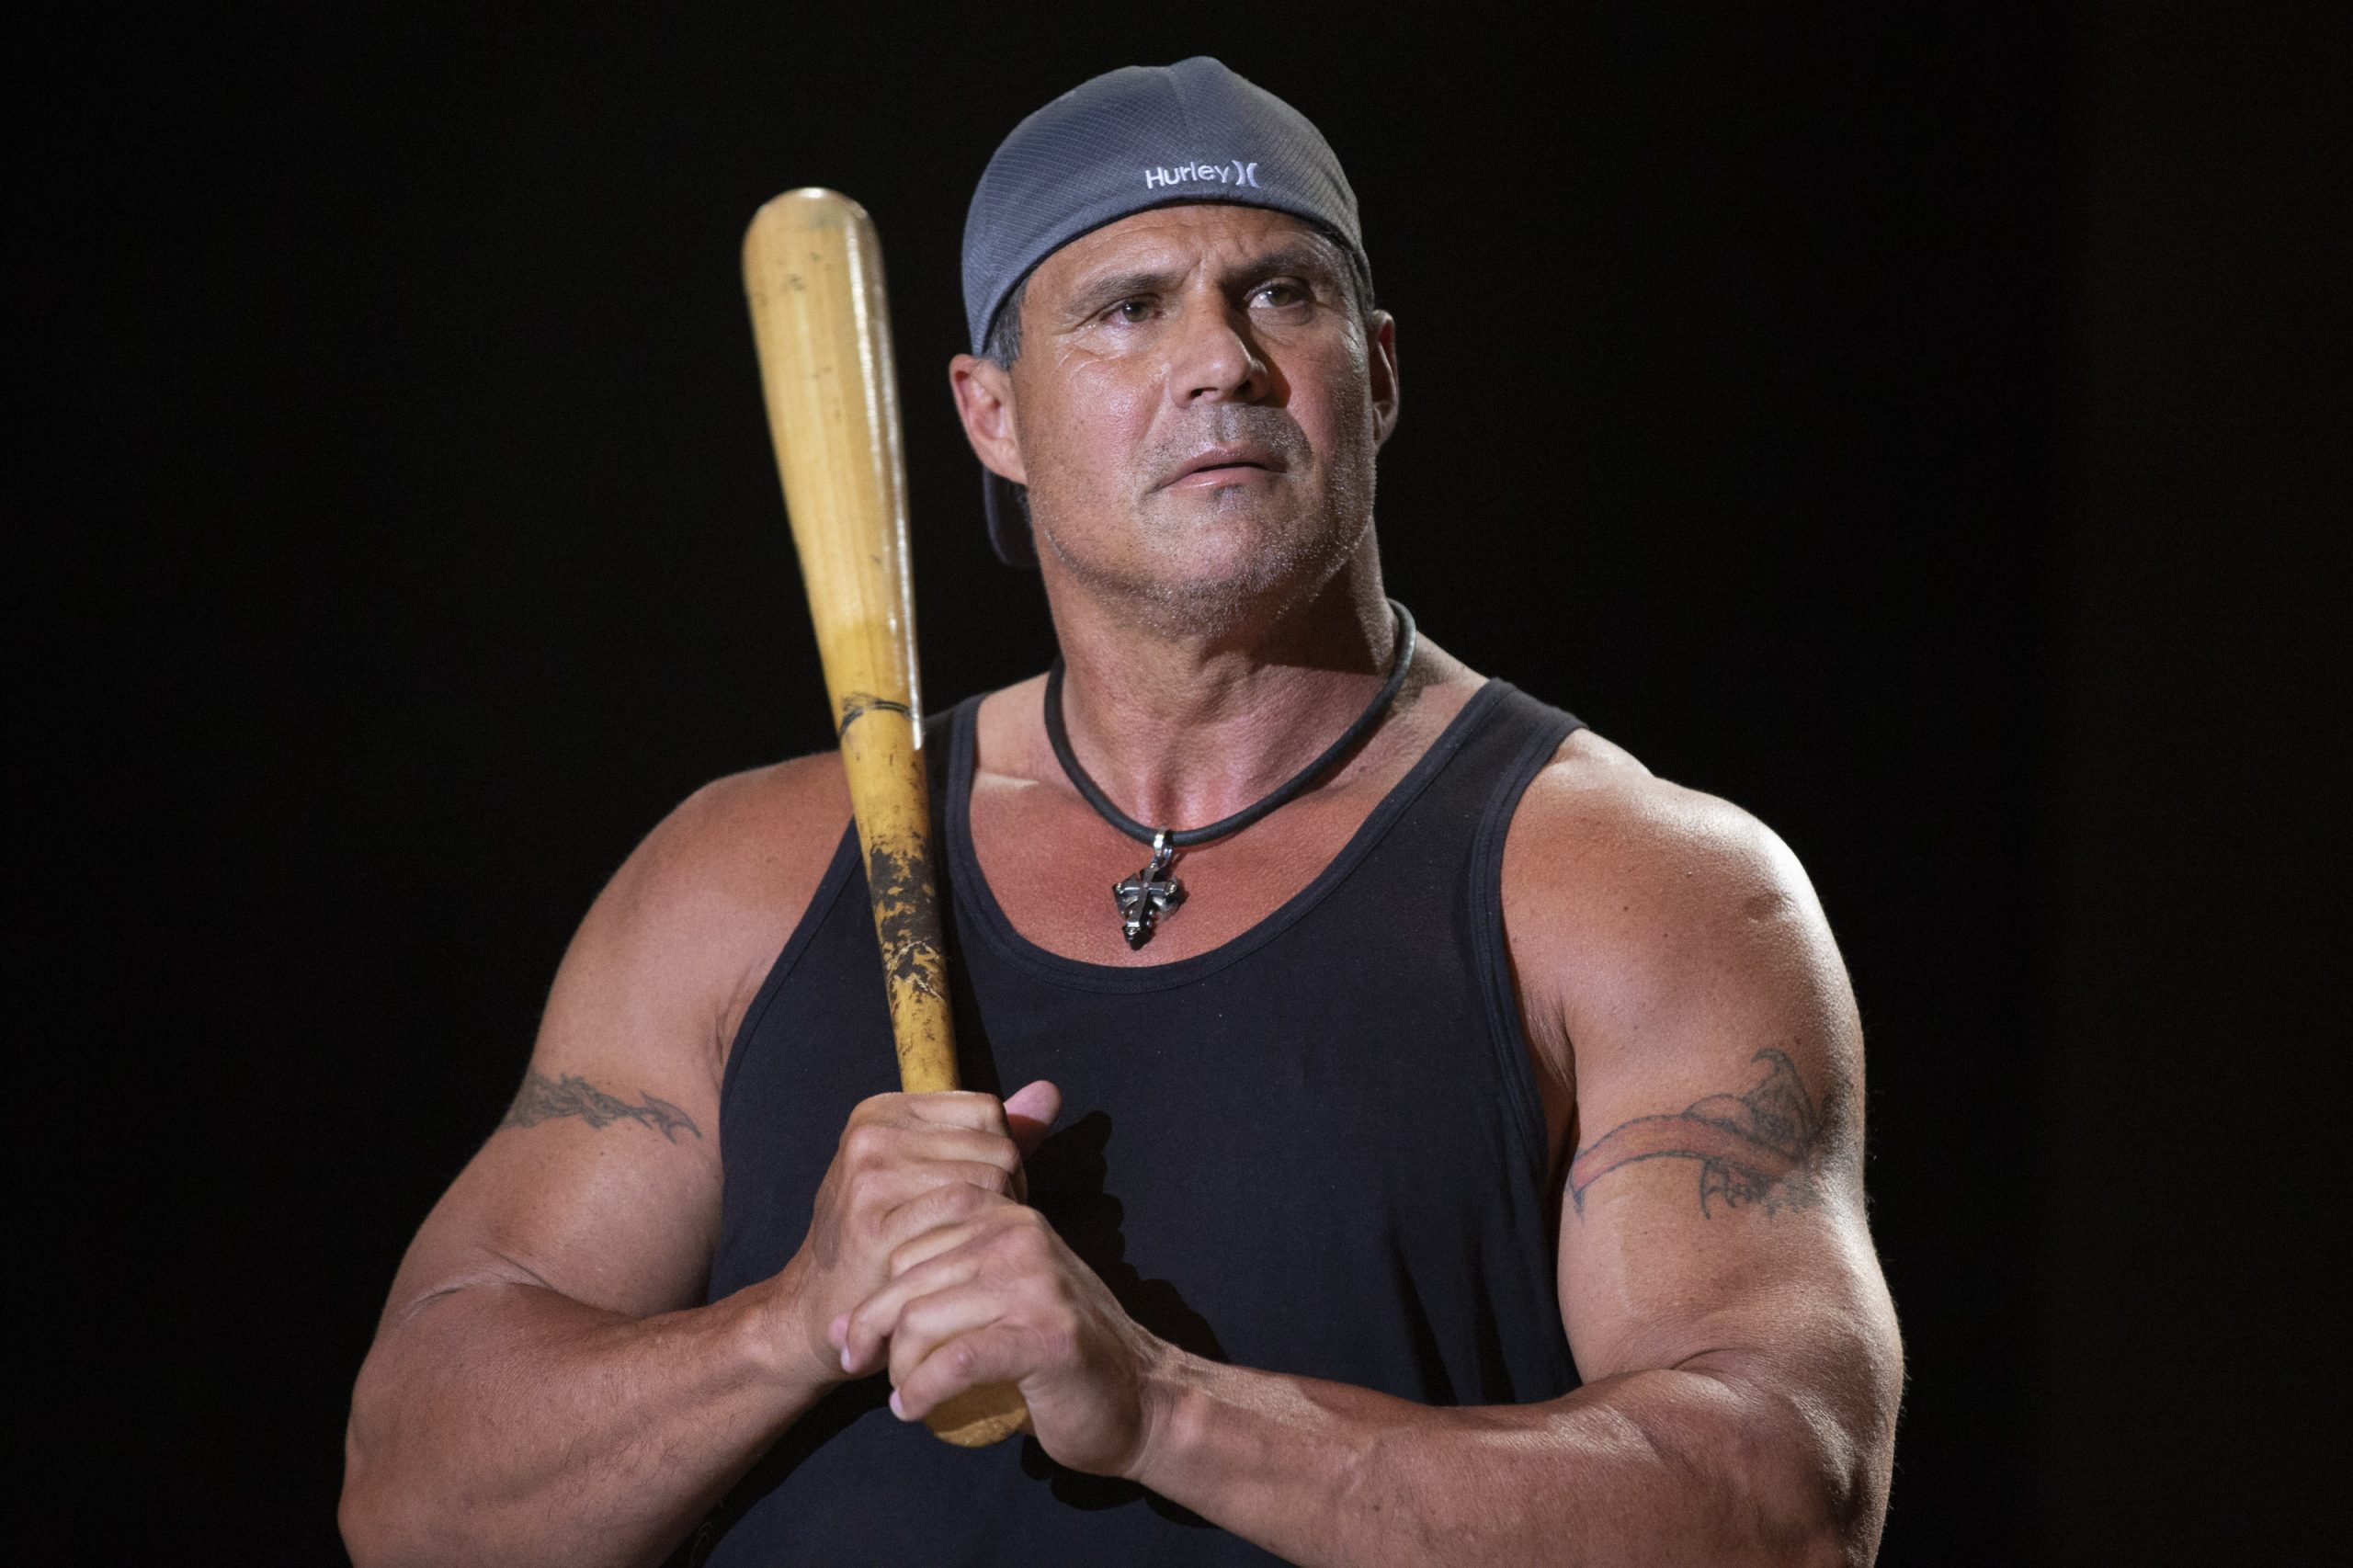 Jose Canseco 2023 - Contract Details, Earnings, Salary & Bio